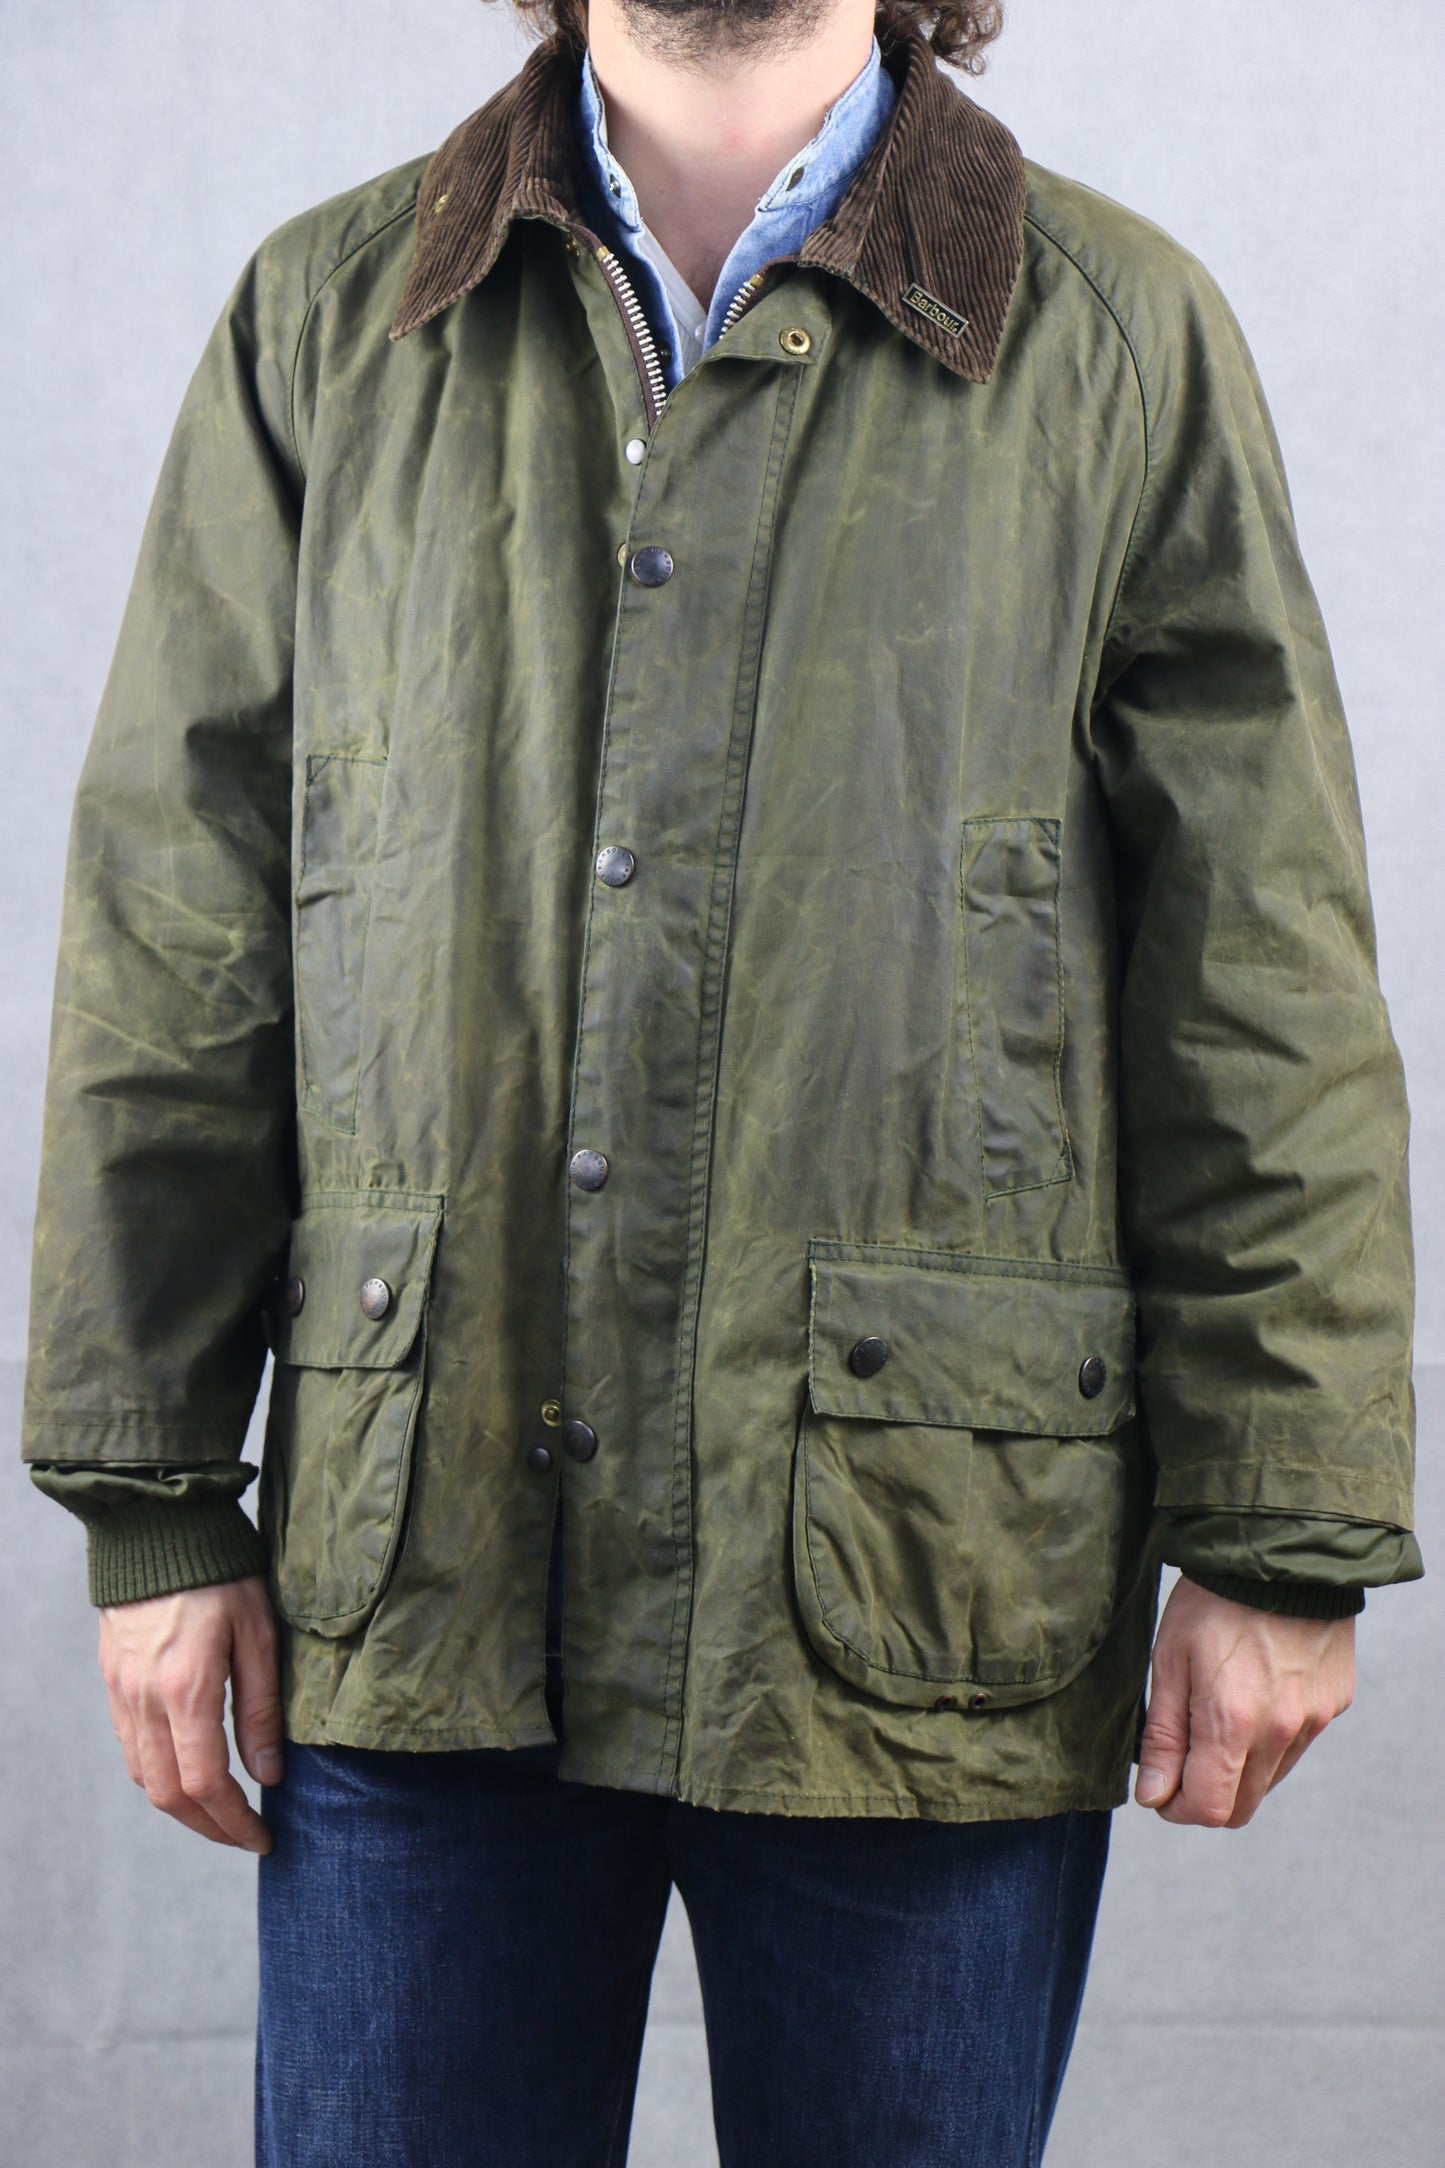 Barbour 'Bedale' C46 Wax Jacket Military Green - vintage clothing clochard92.com